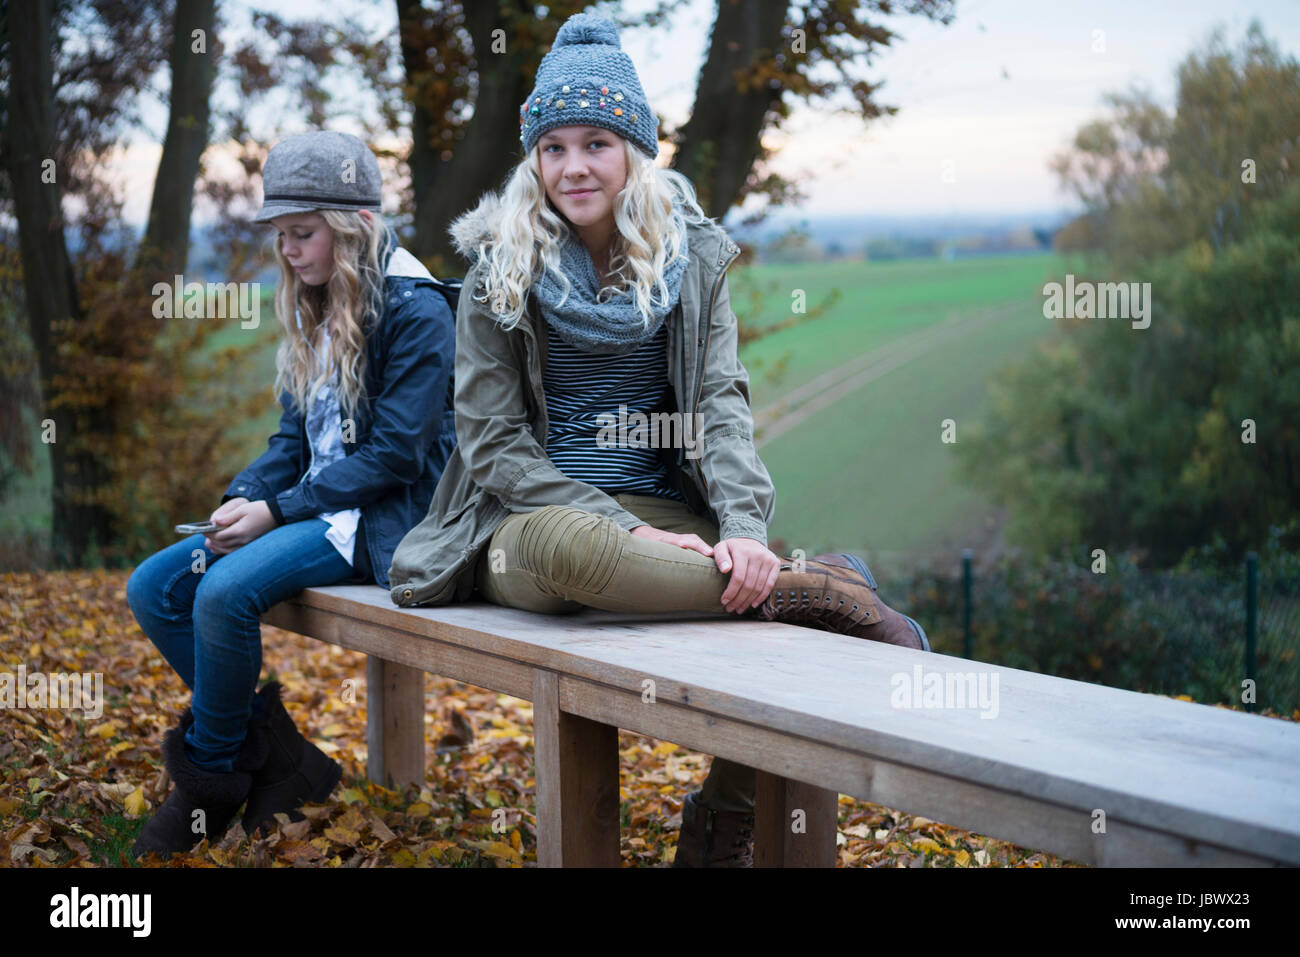 Portrait of girl and her sister sitting on autumn park bench Stock Photo